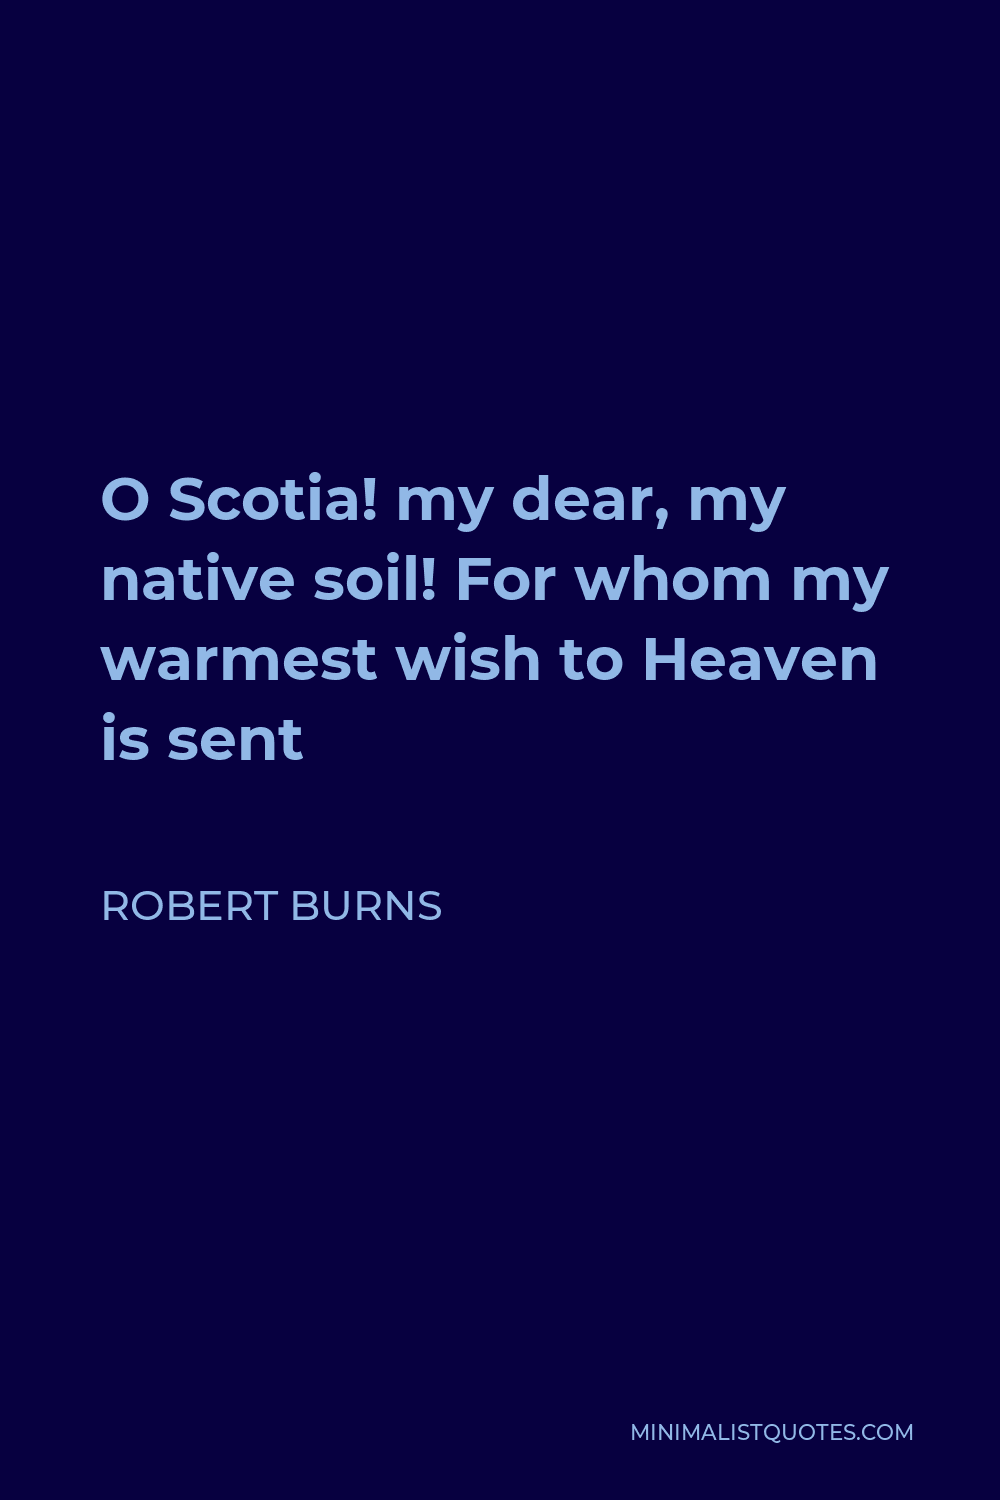 Robert Burns Quote - O Scotia! my dear, my native soil! For whom my warmest wish to Heaven is sent